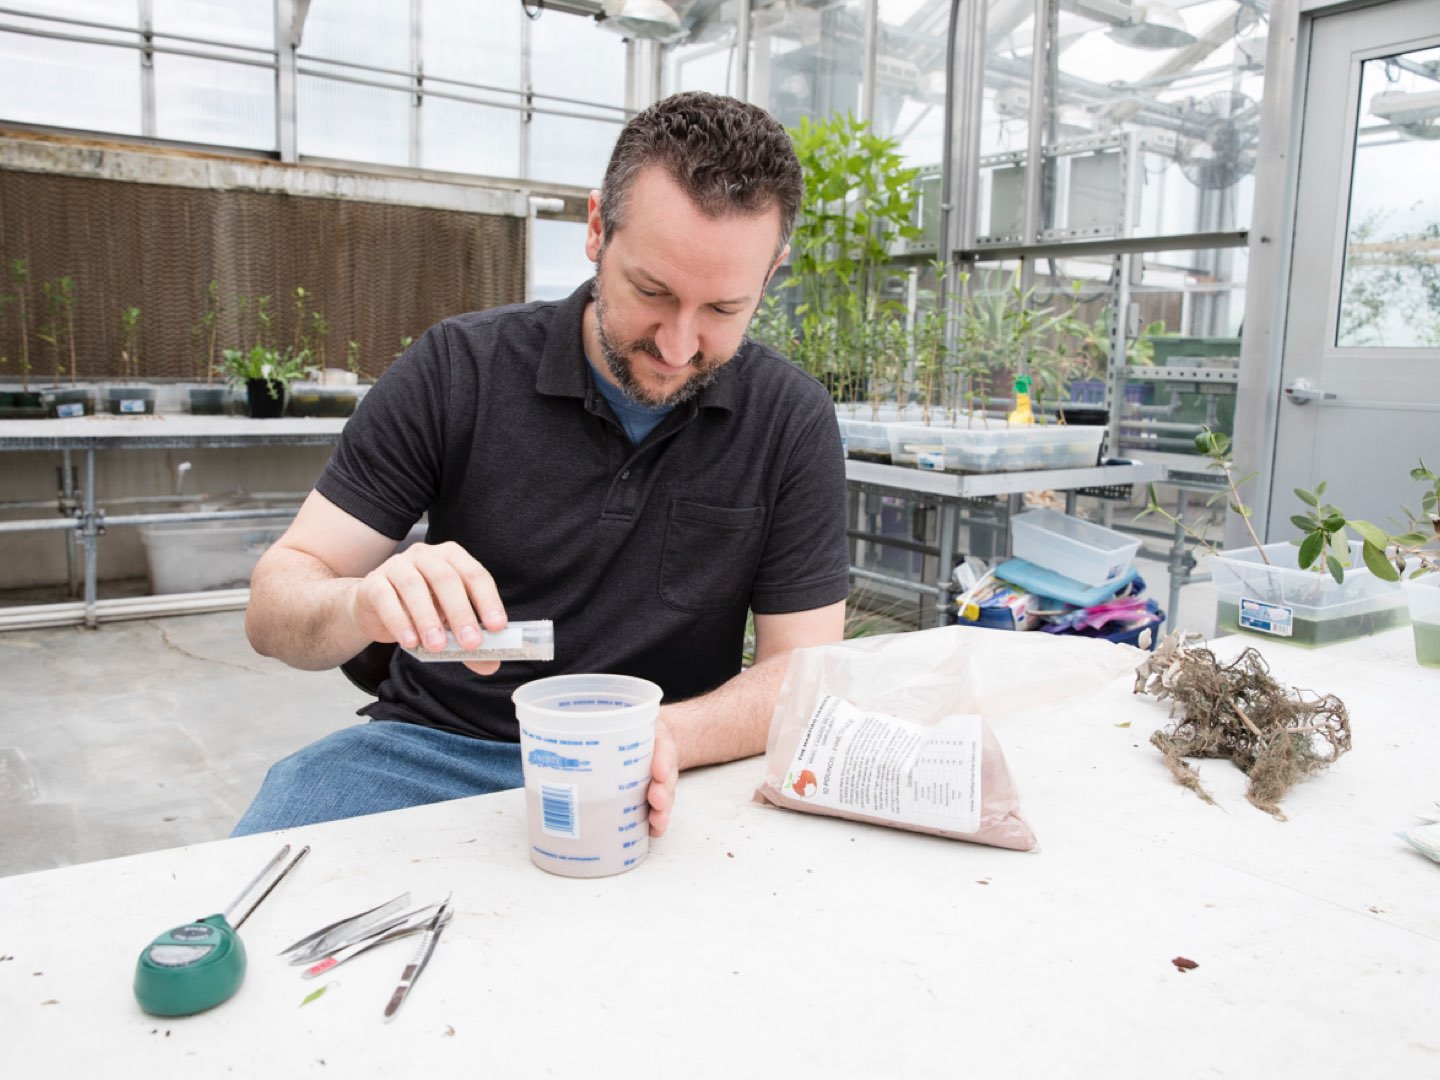 Scott Engle experiments with Martian soil.